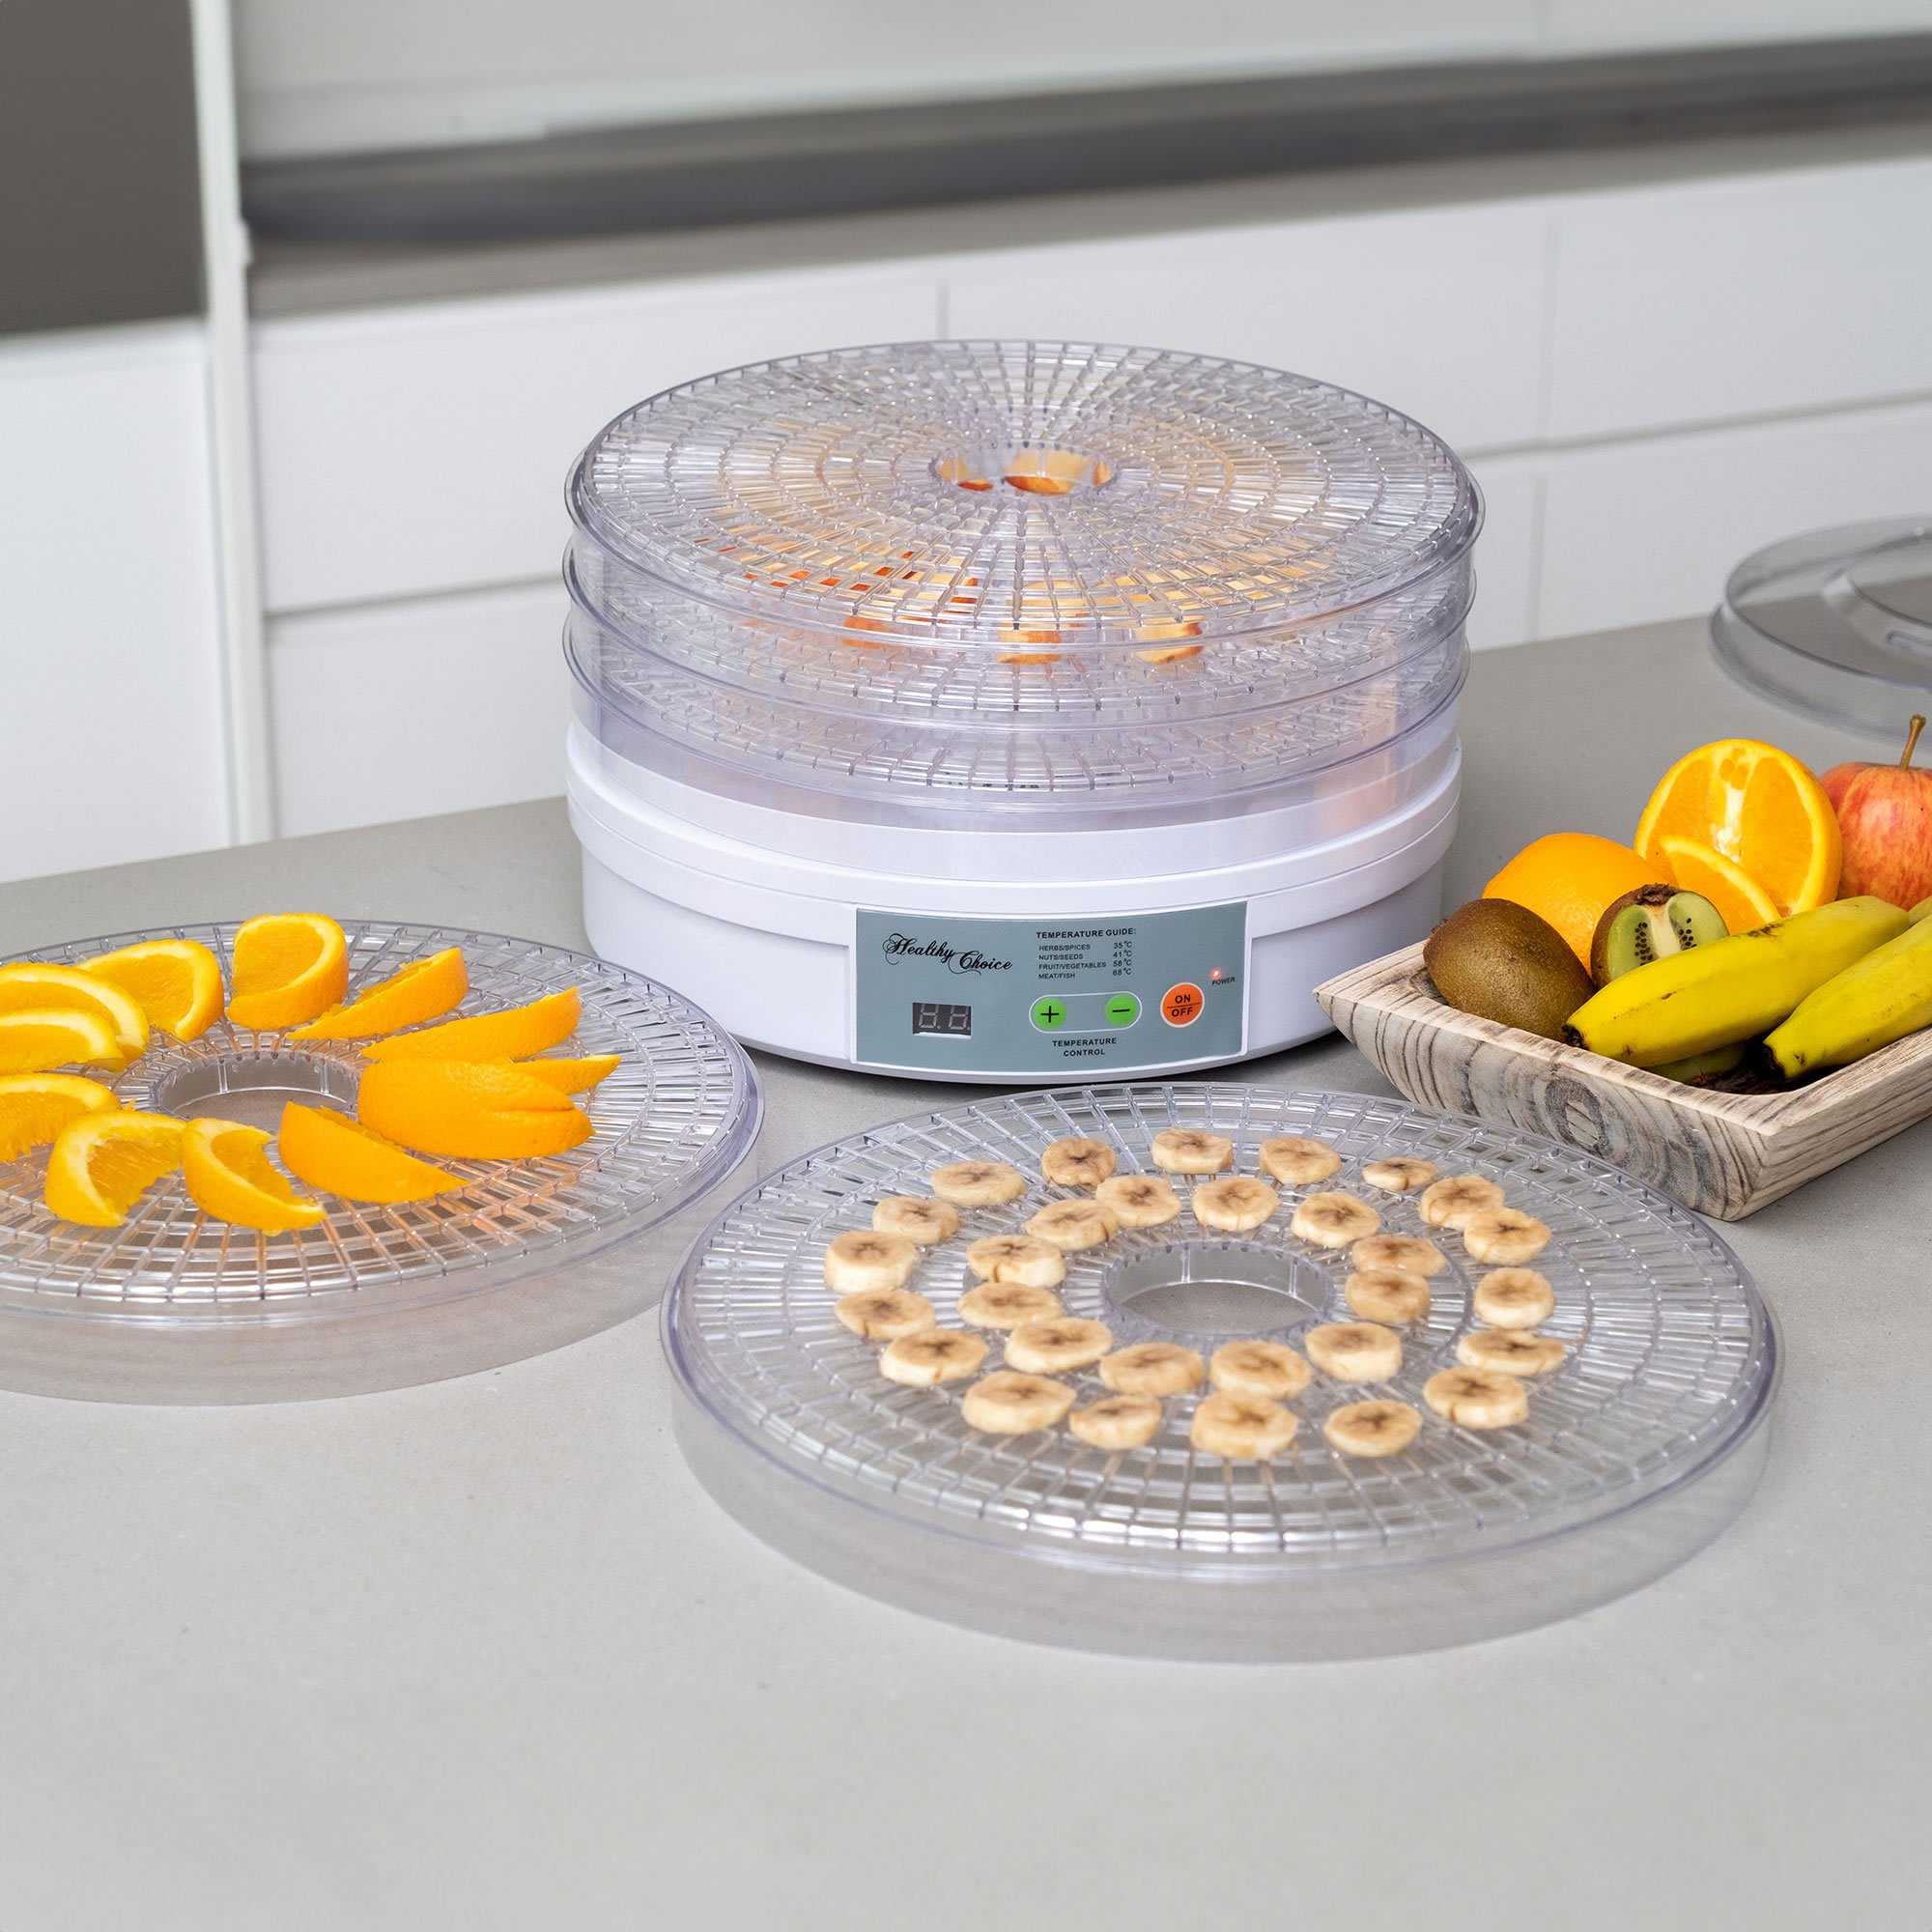 https://res.cloudinary.com/kitchenwarehouse/image/upload/t_PDP_2000x2000/Supplier%20Images%20/2000px/Healthy-Choice-5-Tray-Food-Dehydrator-with-Digital-Display_3_2000px.jpg